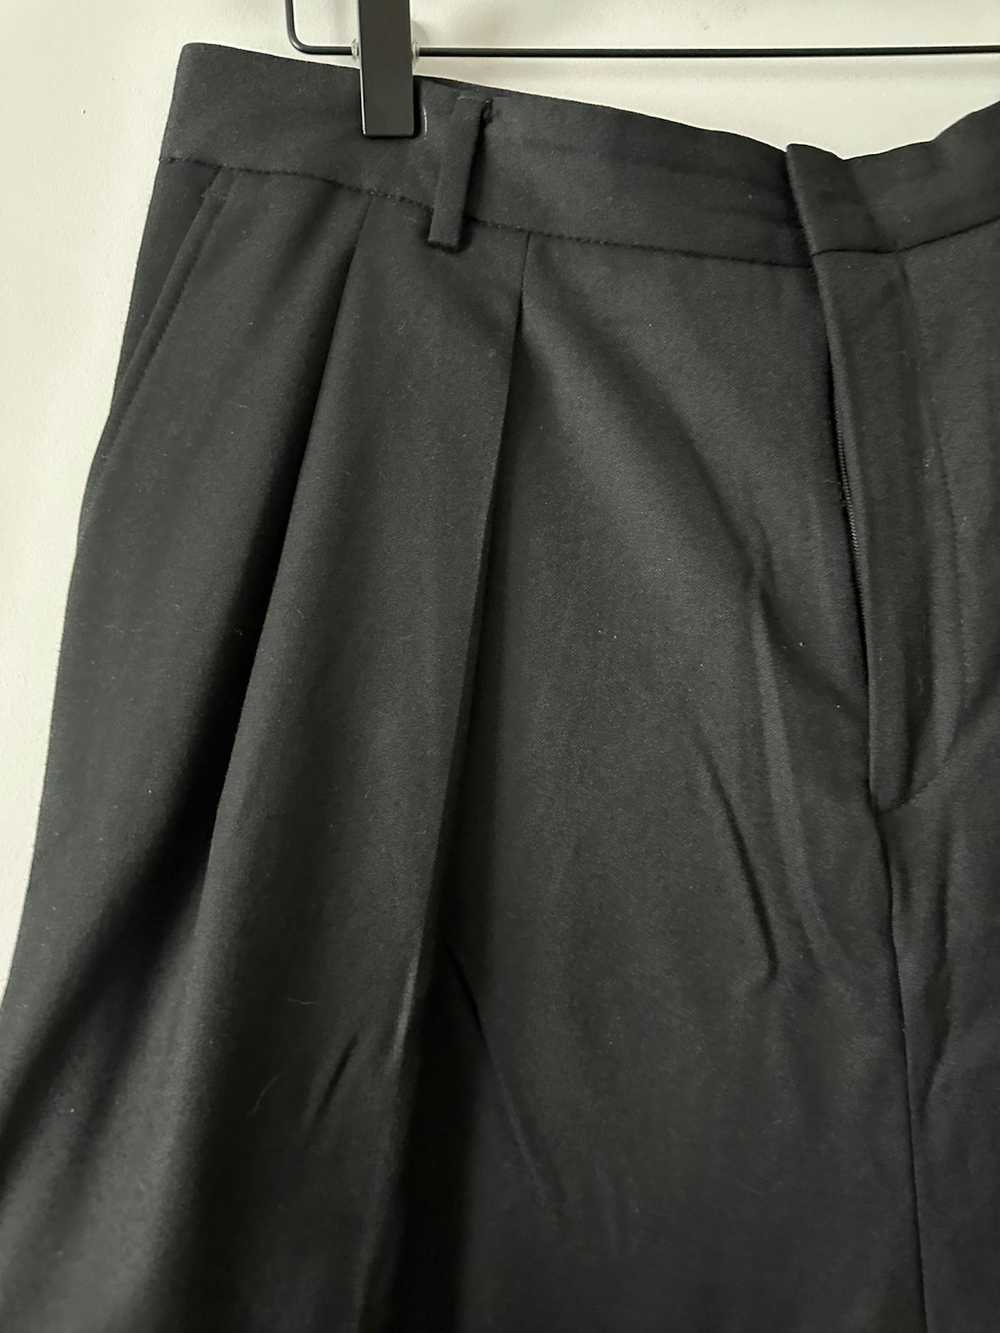 Givenchy Givenchy drop crotch pleated wool pants - image 2